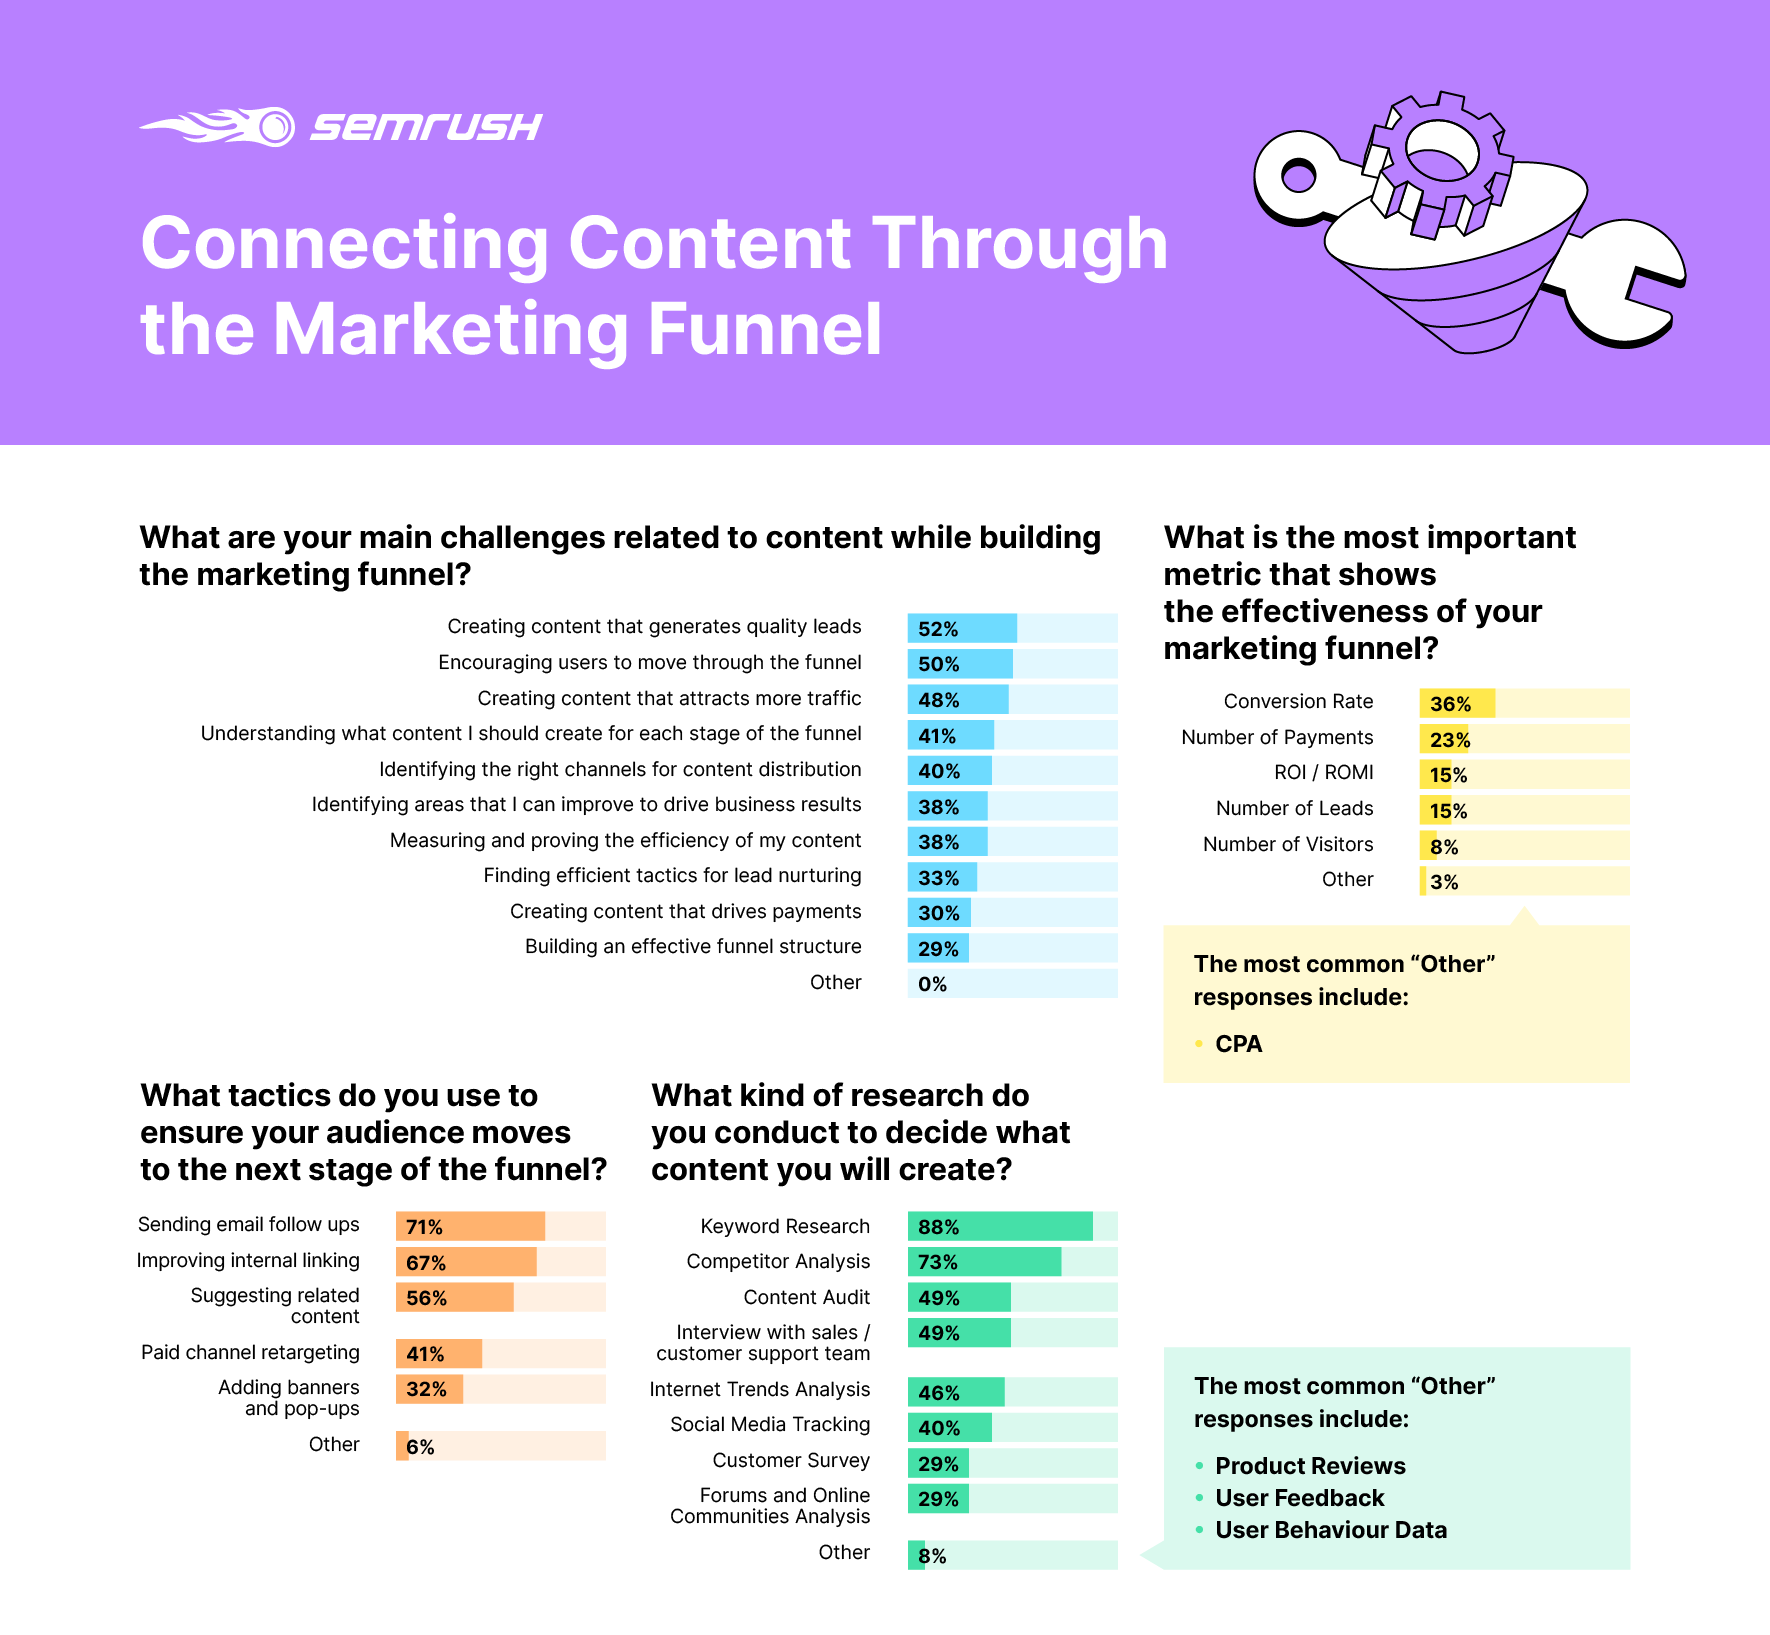 How marketers connect content through the funnel